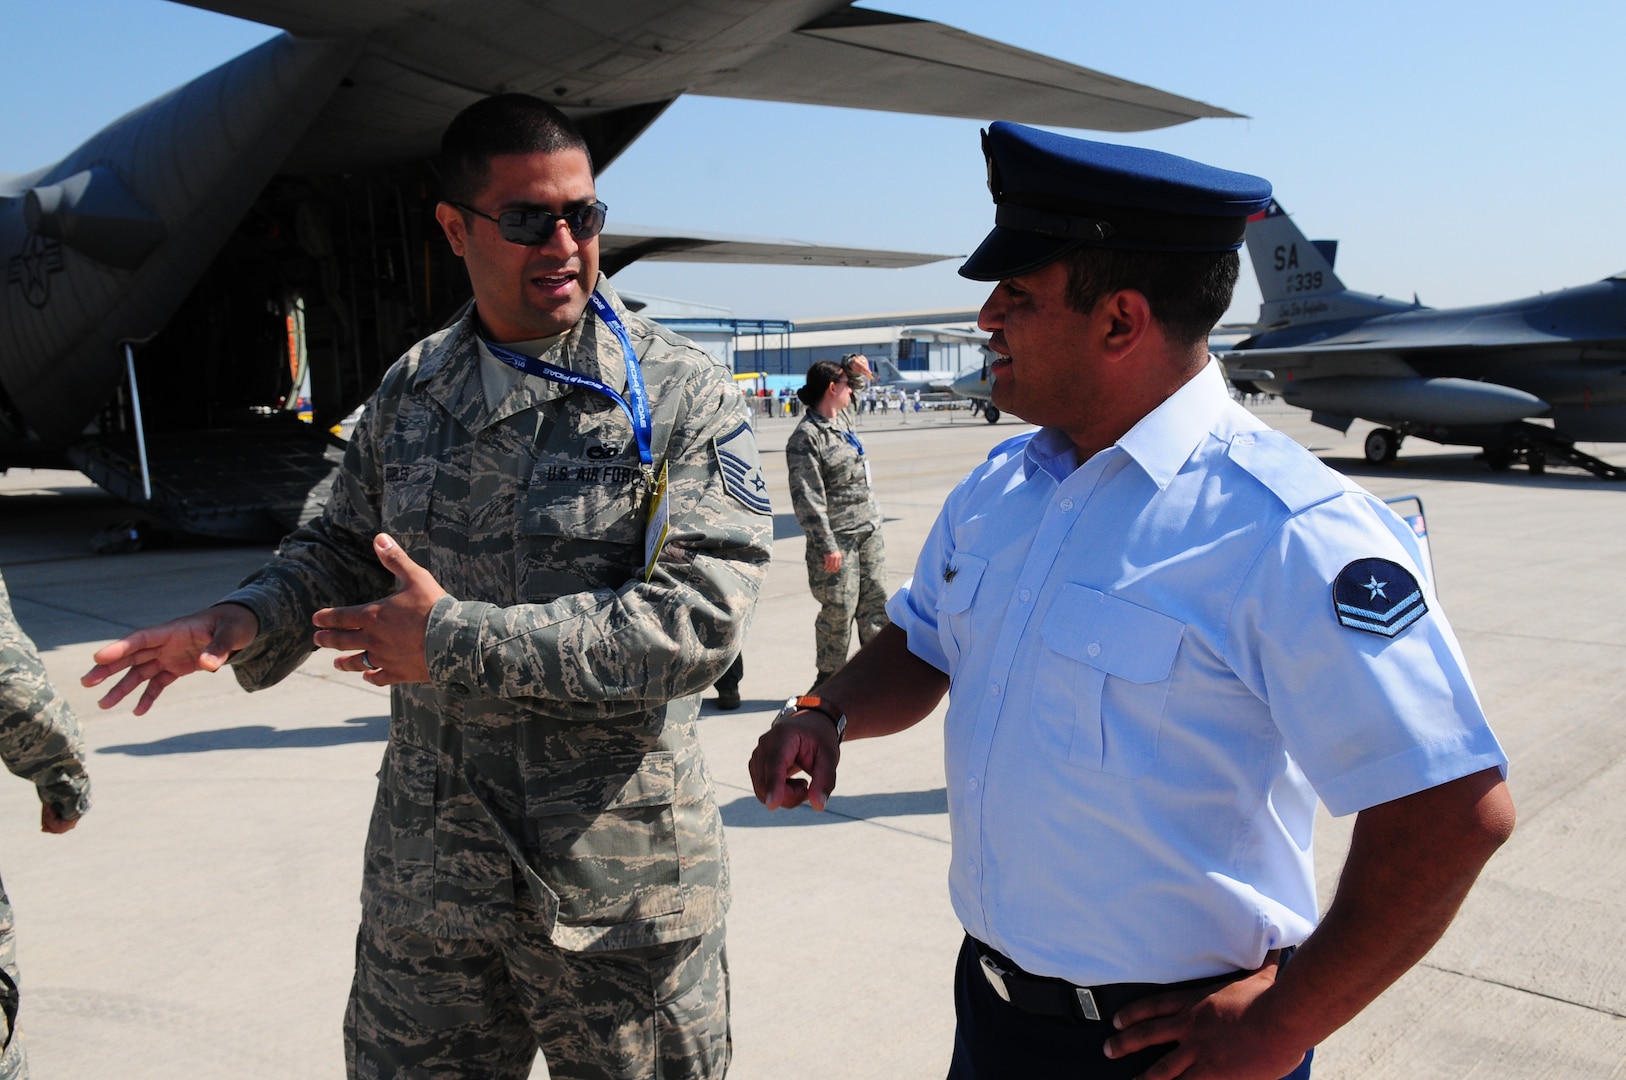 Master Sgt. Stephen Dobles, an aircraft maintenance technician with the 149th Fighter Wing, Texas Air National Guard, exchanges maintenance practices with his counterpart with the FACH (Fuerza Aerea de Chile) during FIDAE (Feria Internacional del Aire y del Espacio), an international trade air and space show, in Santiago, Chile, March 26, 2014. Members of the Texas Air National Guard were in Chile as part of the National Guard Bureau's State Partnership Program. 